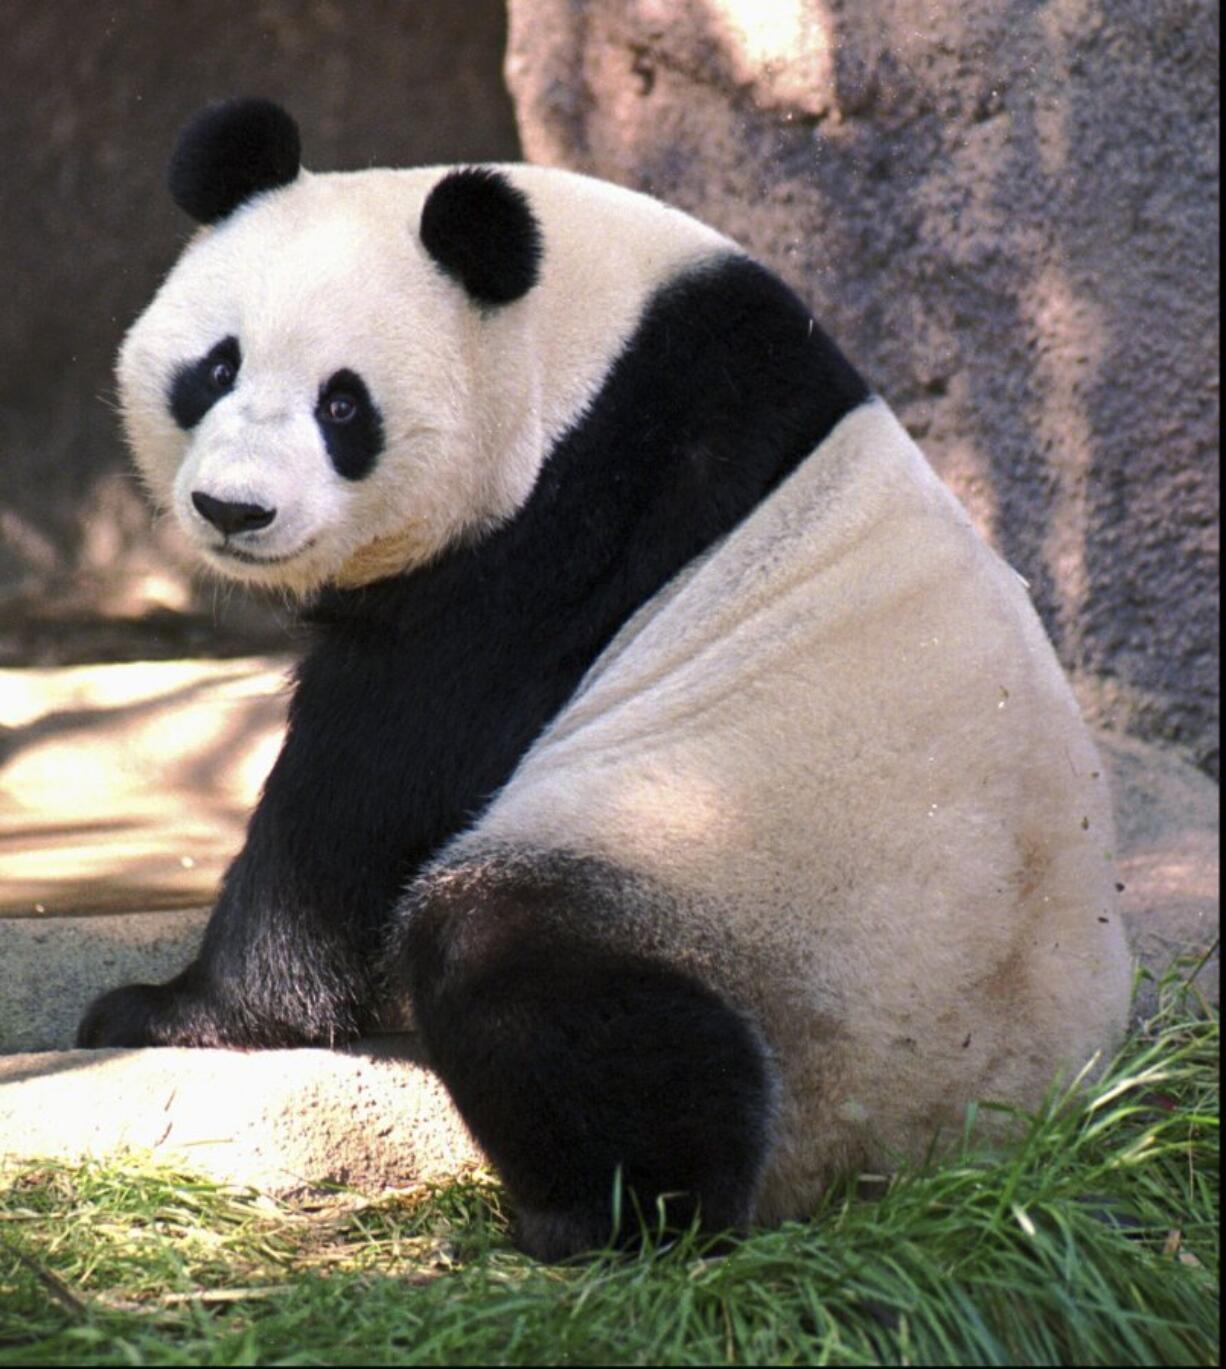 FILE--Bai Yun, one of two giant pandas on exhibit at the San Diego Zoo, looks towards the crowd on Nov. 1, 1996, in San Diego. China is working on sending a new pair of giant pandas to the San Diego Zoo, renewing its longstanding gesture of friendship toward the United States after nearly all the iconic bears in the U.S. were returned to the Asian country in recent years amid rocky relations between the two nations. San Diego sent back its last pandas to China in 2019.